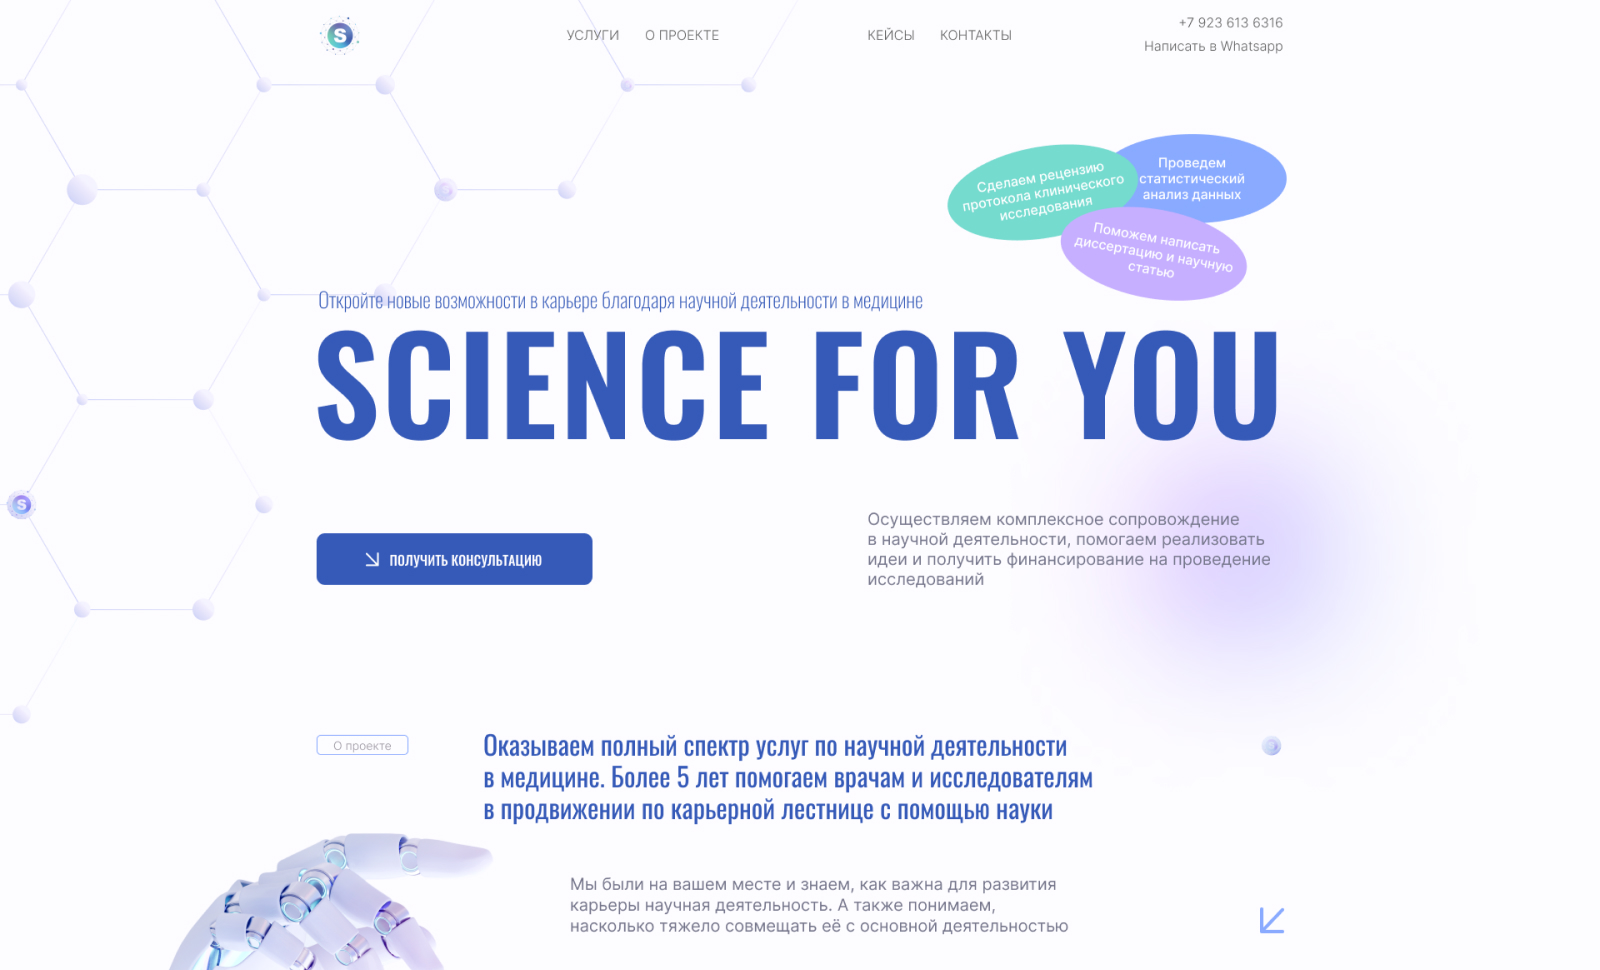 Science services